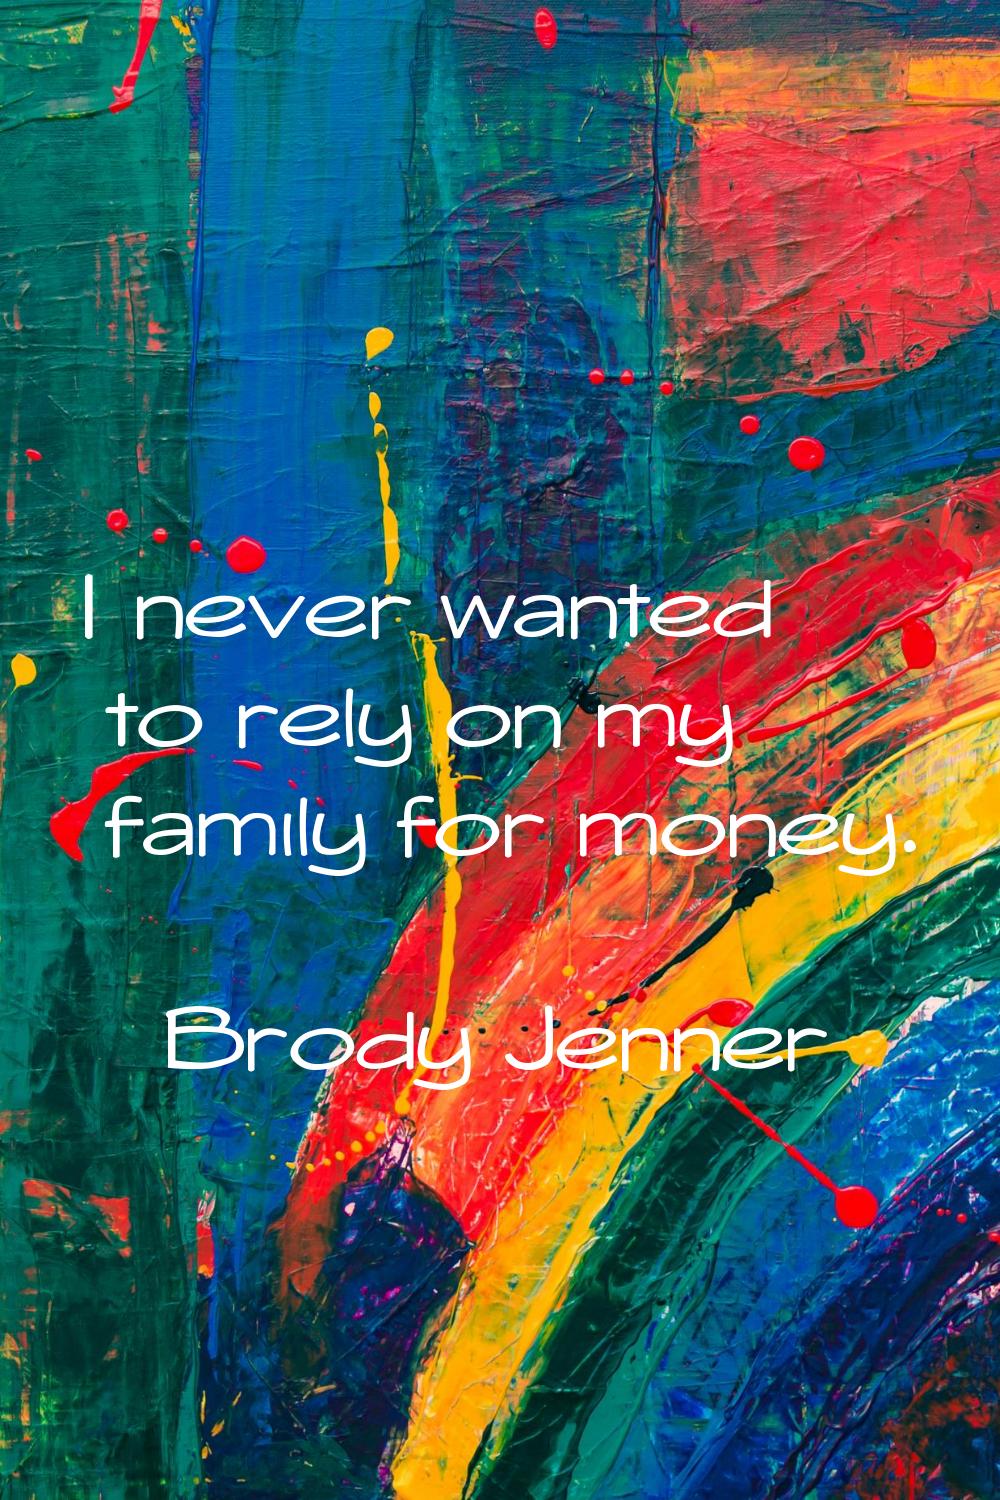 I never wanted to rely on my family for money.